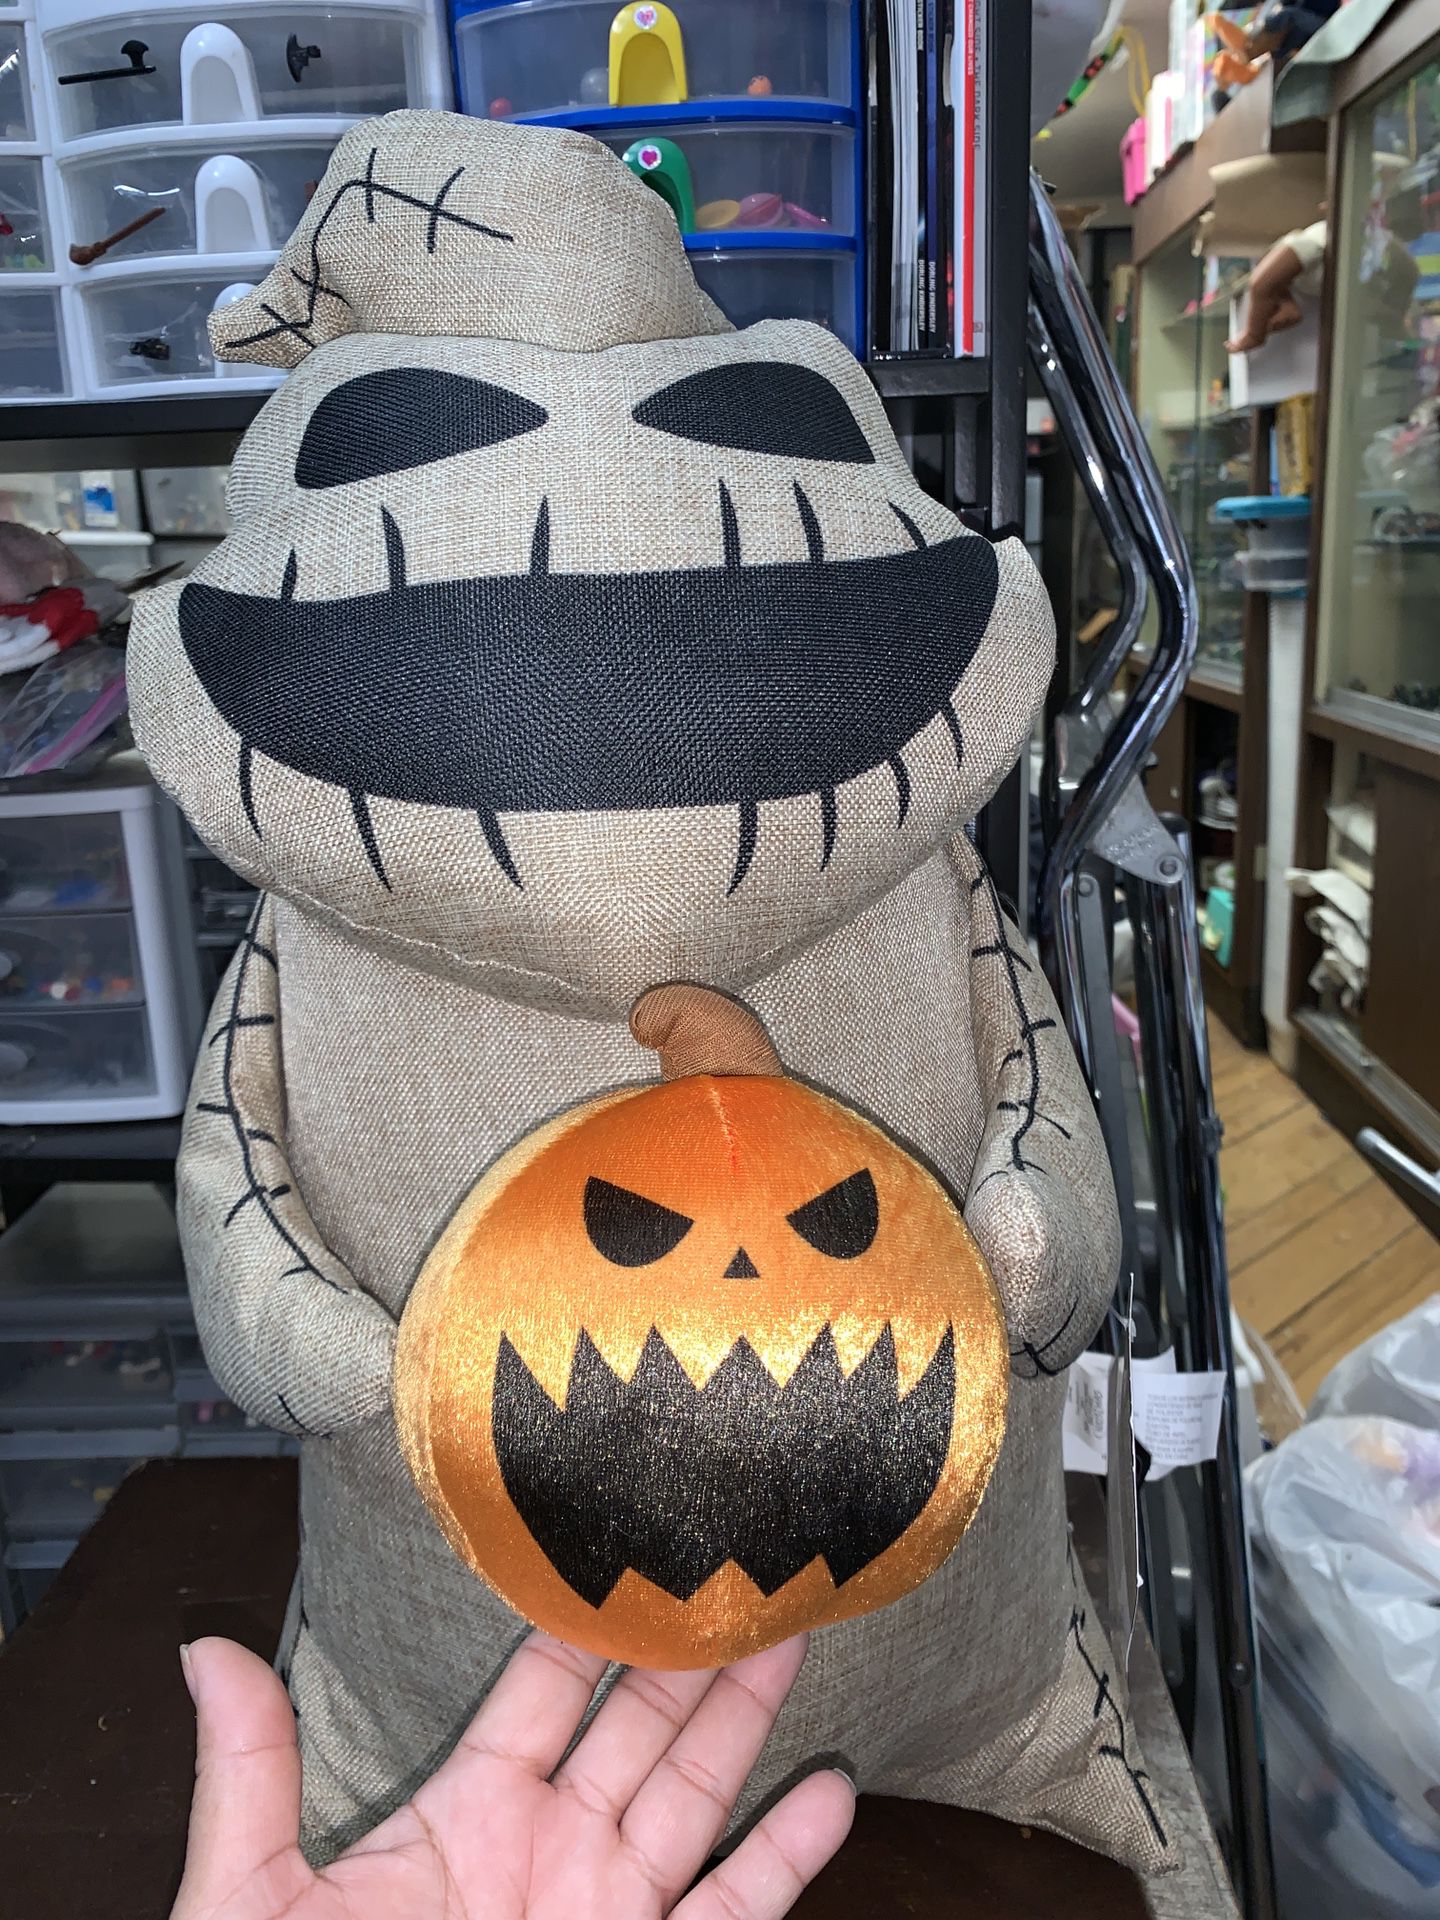 The Nightmare Before Christmas Large Oogie Boogie Plush Decor